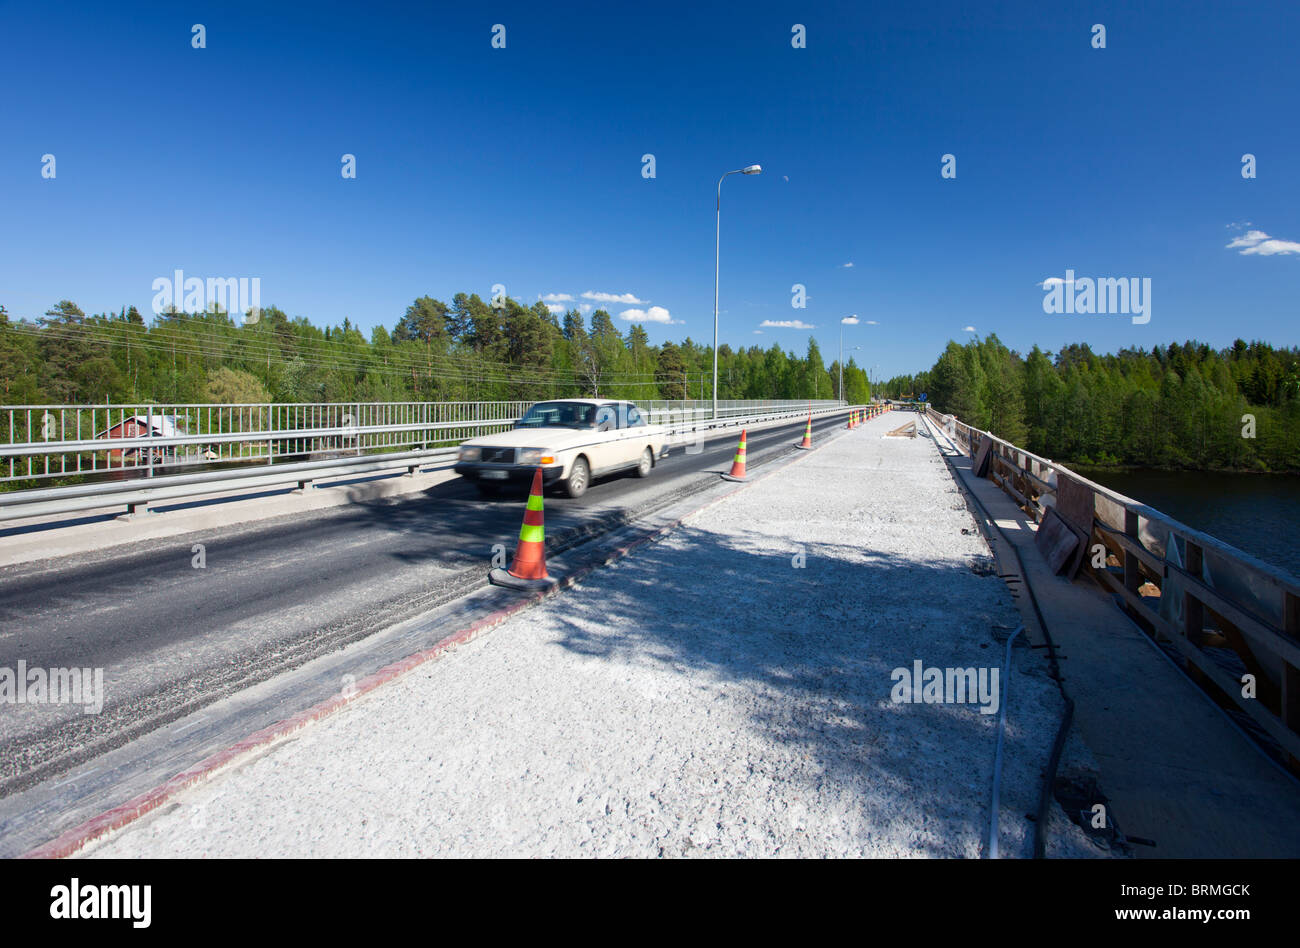 A car crossing a road bridge where half of the deck is under repair and asphalt has been stripped away , Finland Stock Photo